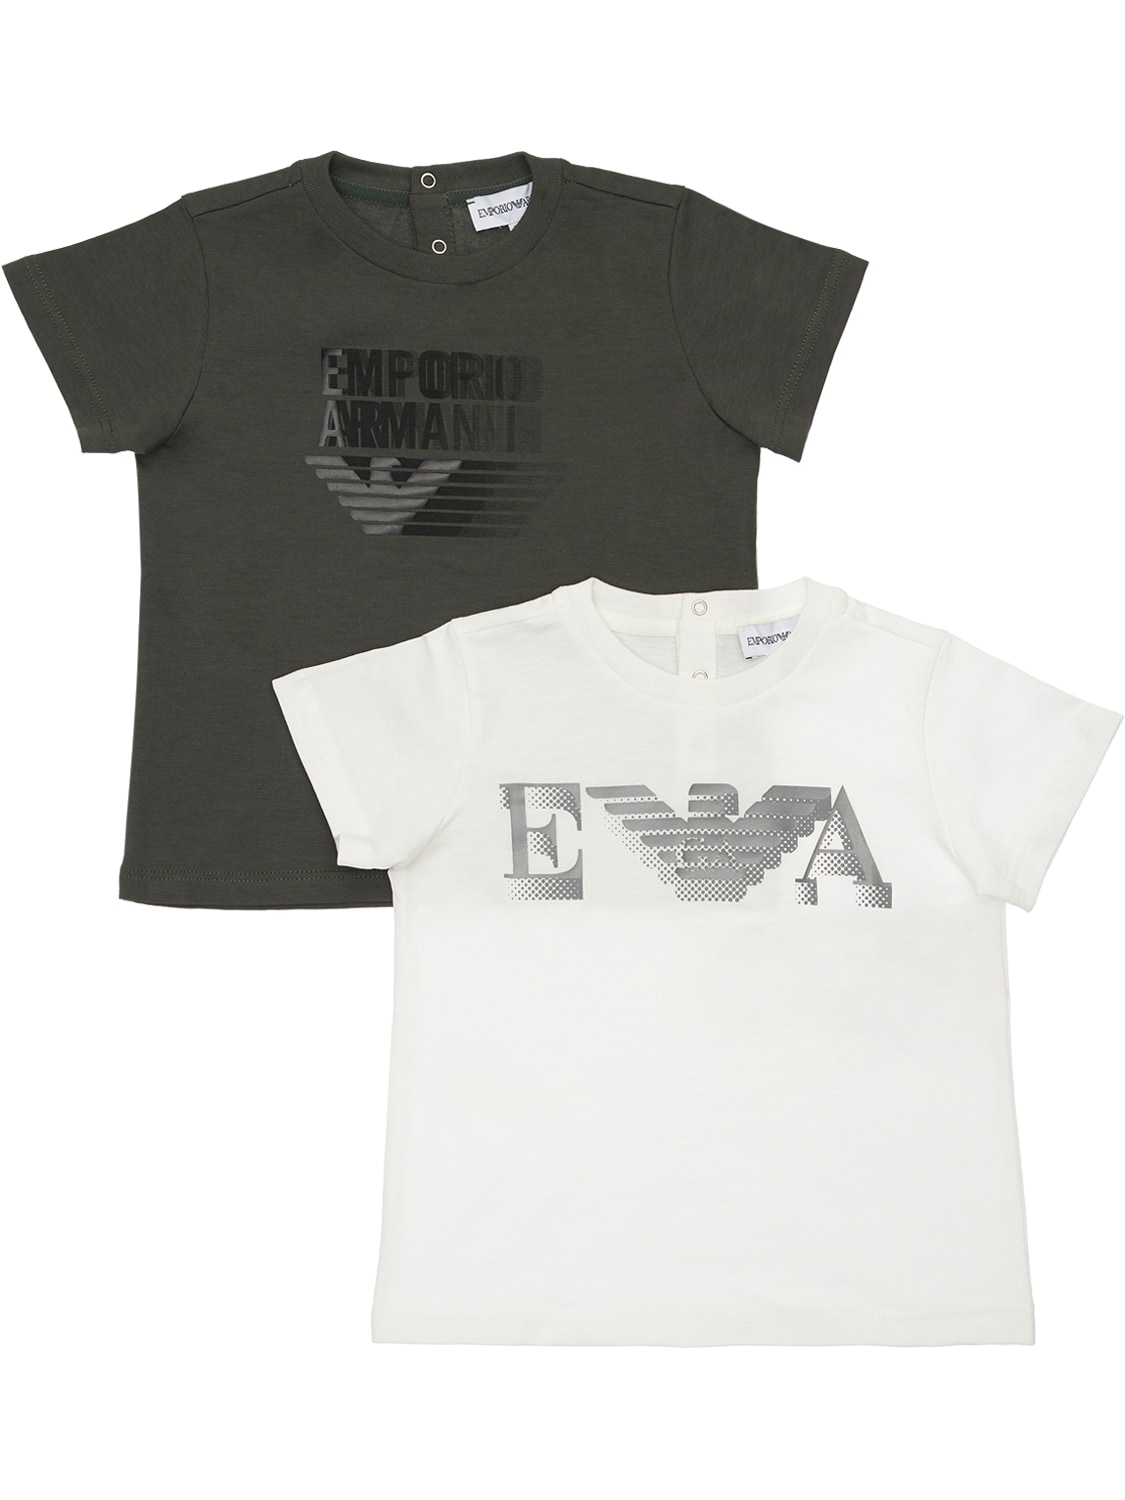 Emporio Armani Kids' Set Of 2 Cotton Jersey T-shirts In White,green